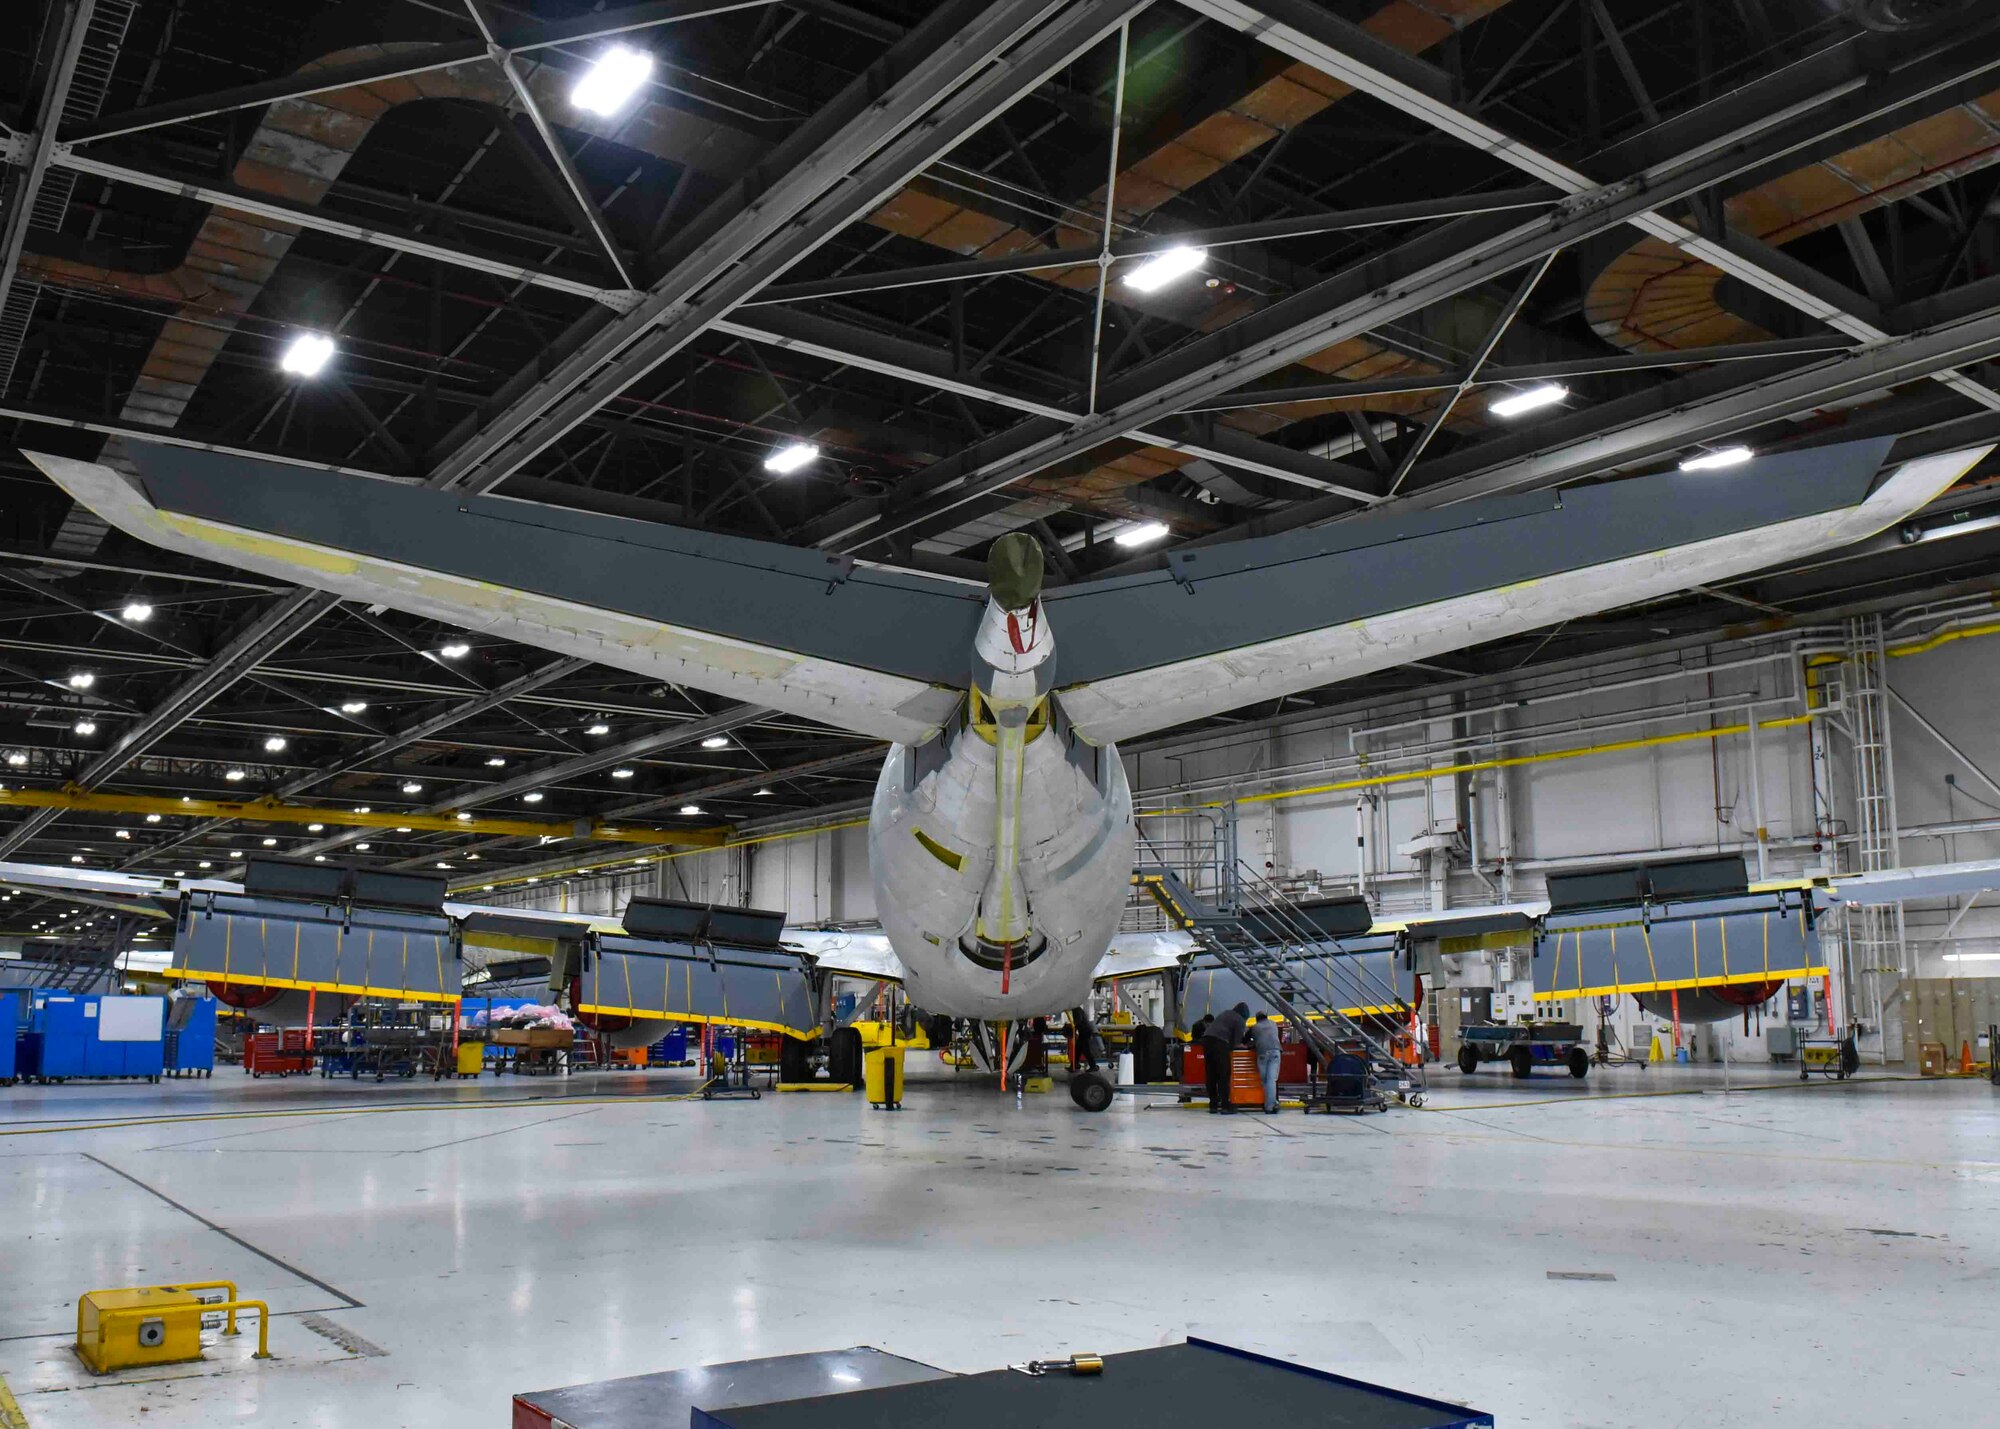 A KC-135 Stratotanker is parked inside a maintenance hangar prior to a test flight at the Oklahoma City Air Logistics Complex on Tinker Air Force Base, Oklahoma Nov. 23, 2019. After going through programmed depot maintenance, each aircraft must be taken on a test flight to ensure it is safe for long-term use. (U.S. Air Force photo by Airman Kiaundra Miller)